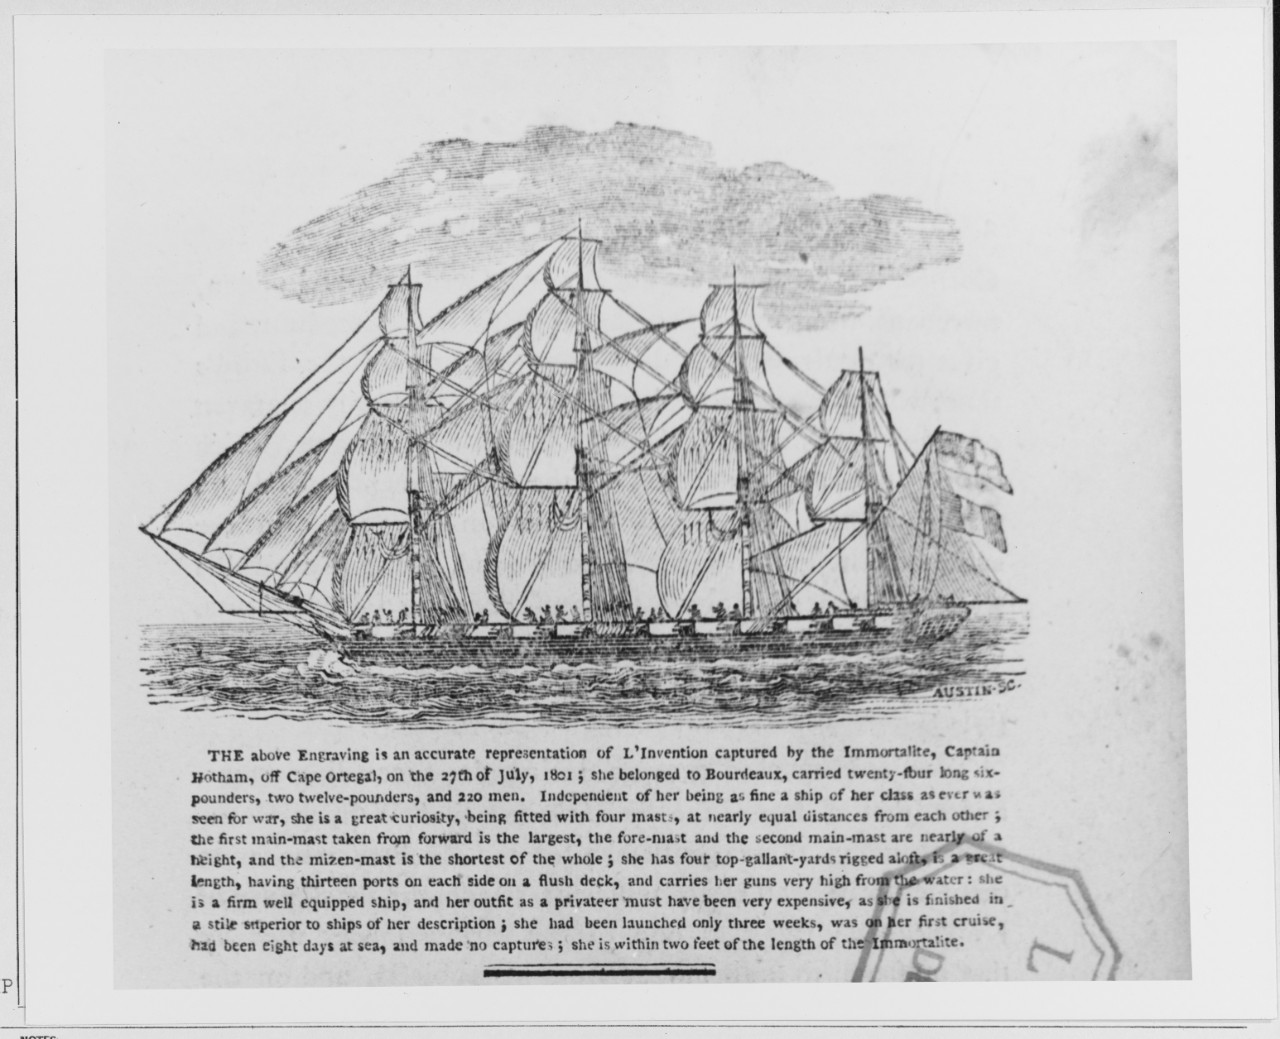 L'INVENTION, French privateer of 26 guns, 1801.